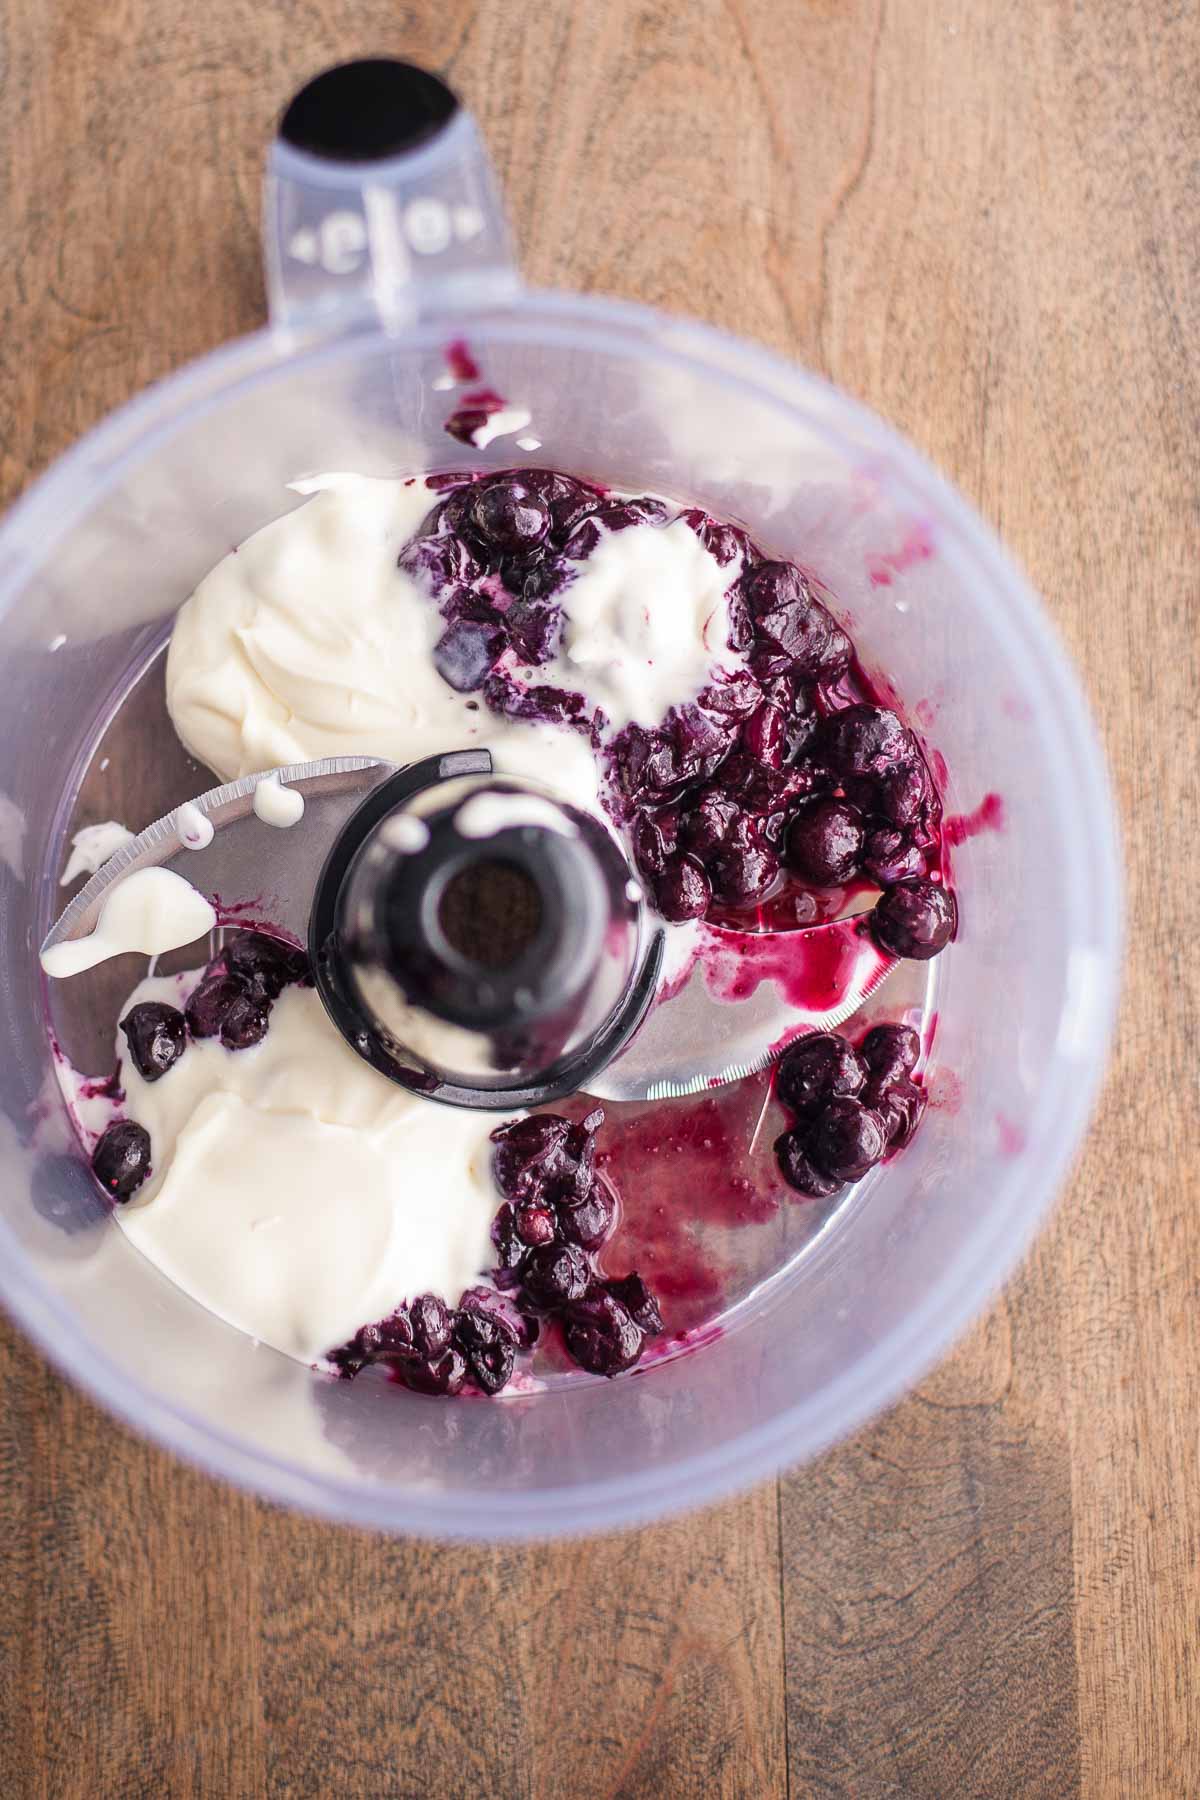 Blueberries and creme fraiche in the food processor